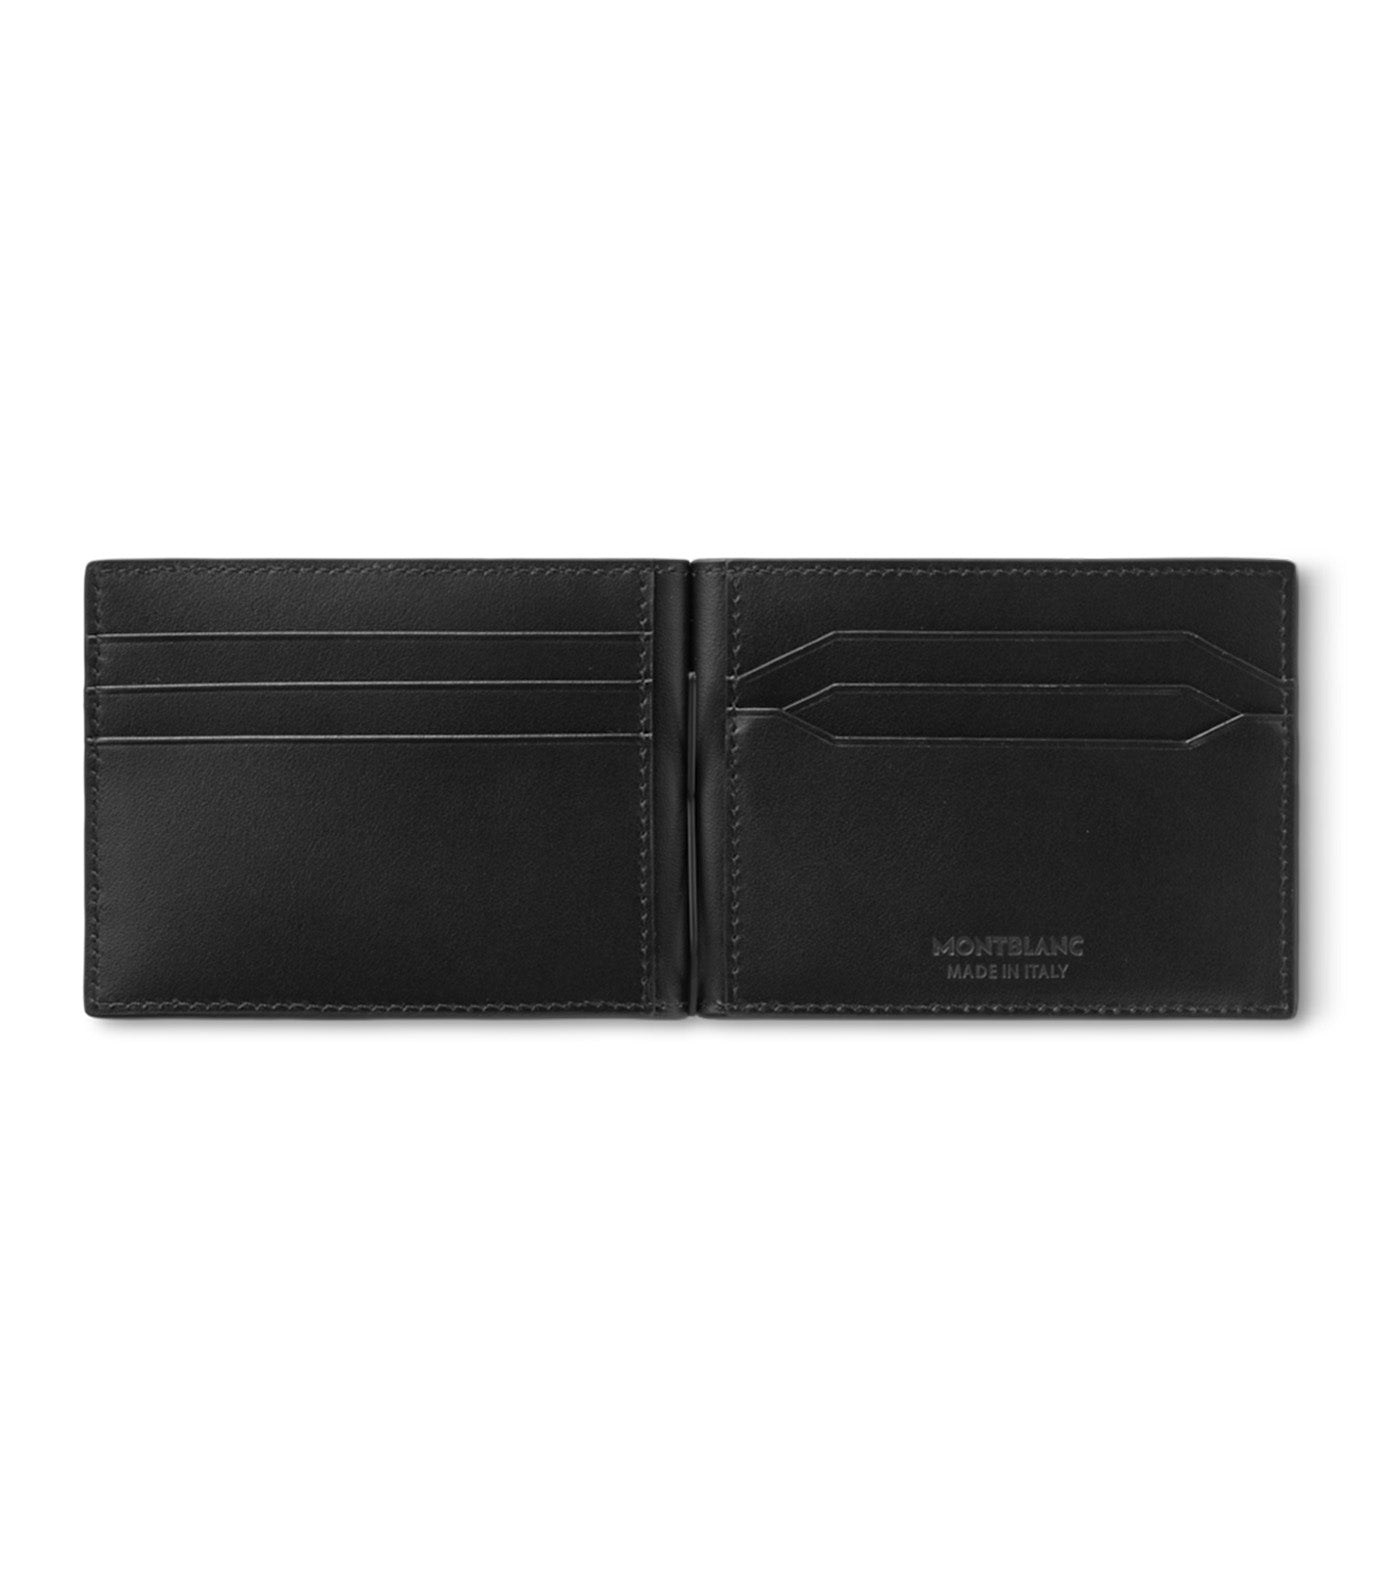 Extreme 3.0 Wallet 6cc With Money Clip Black